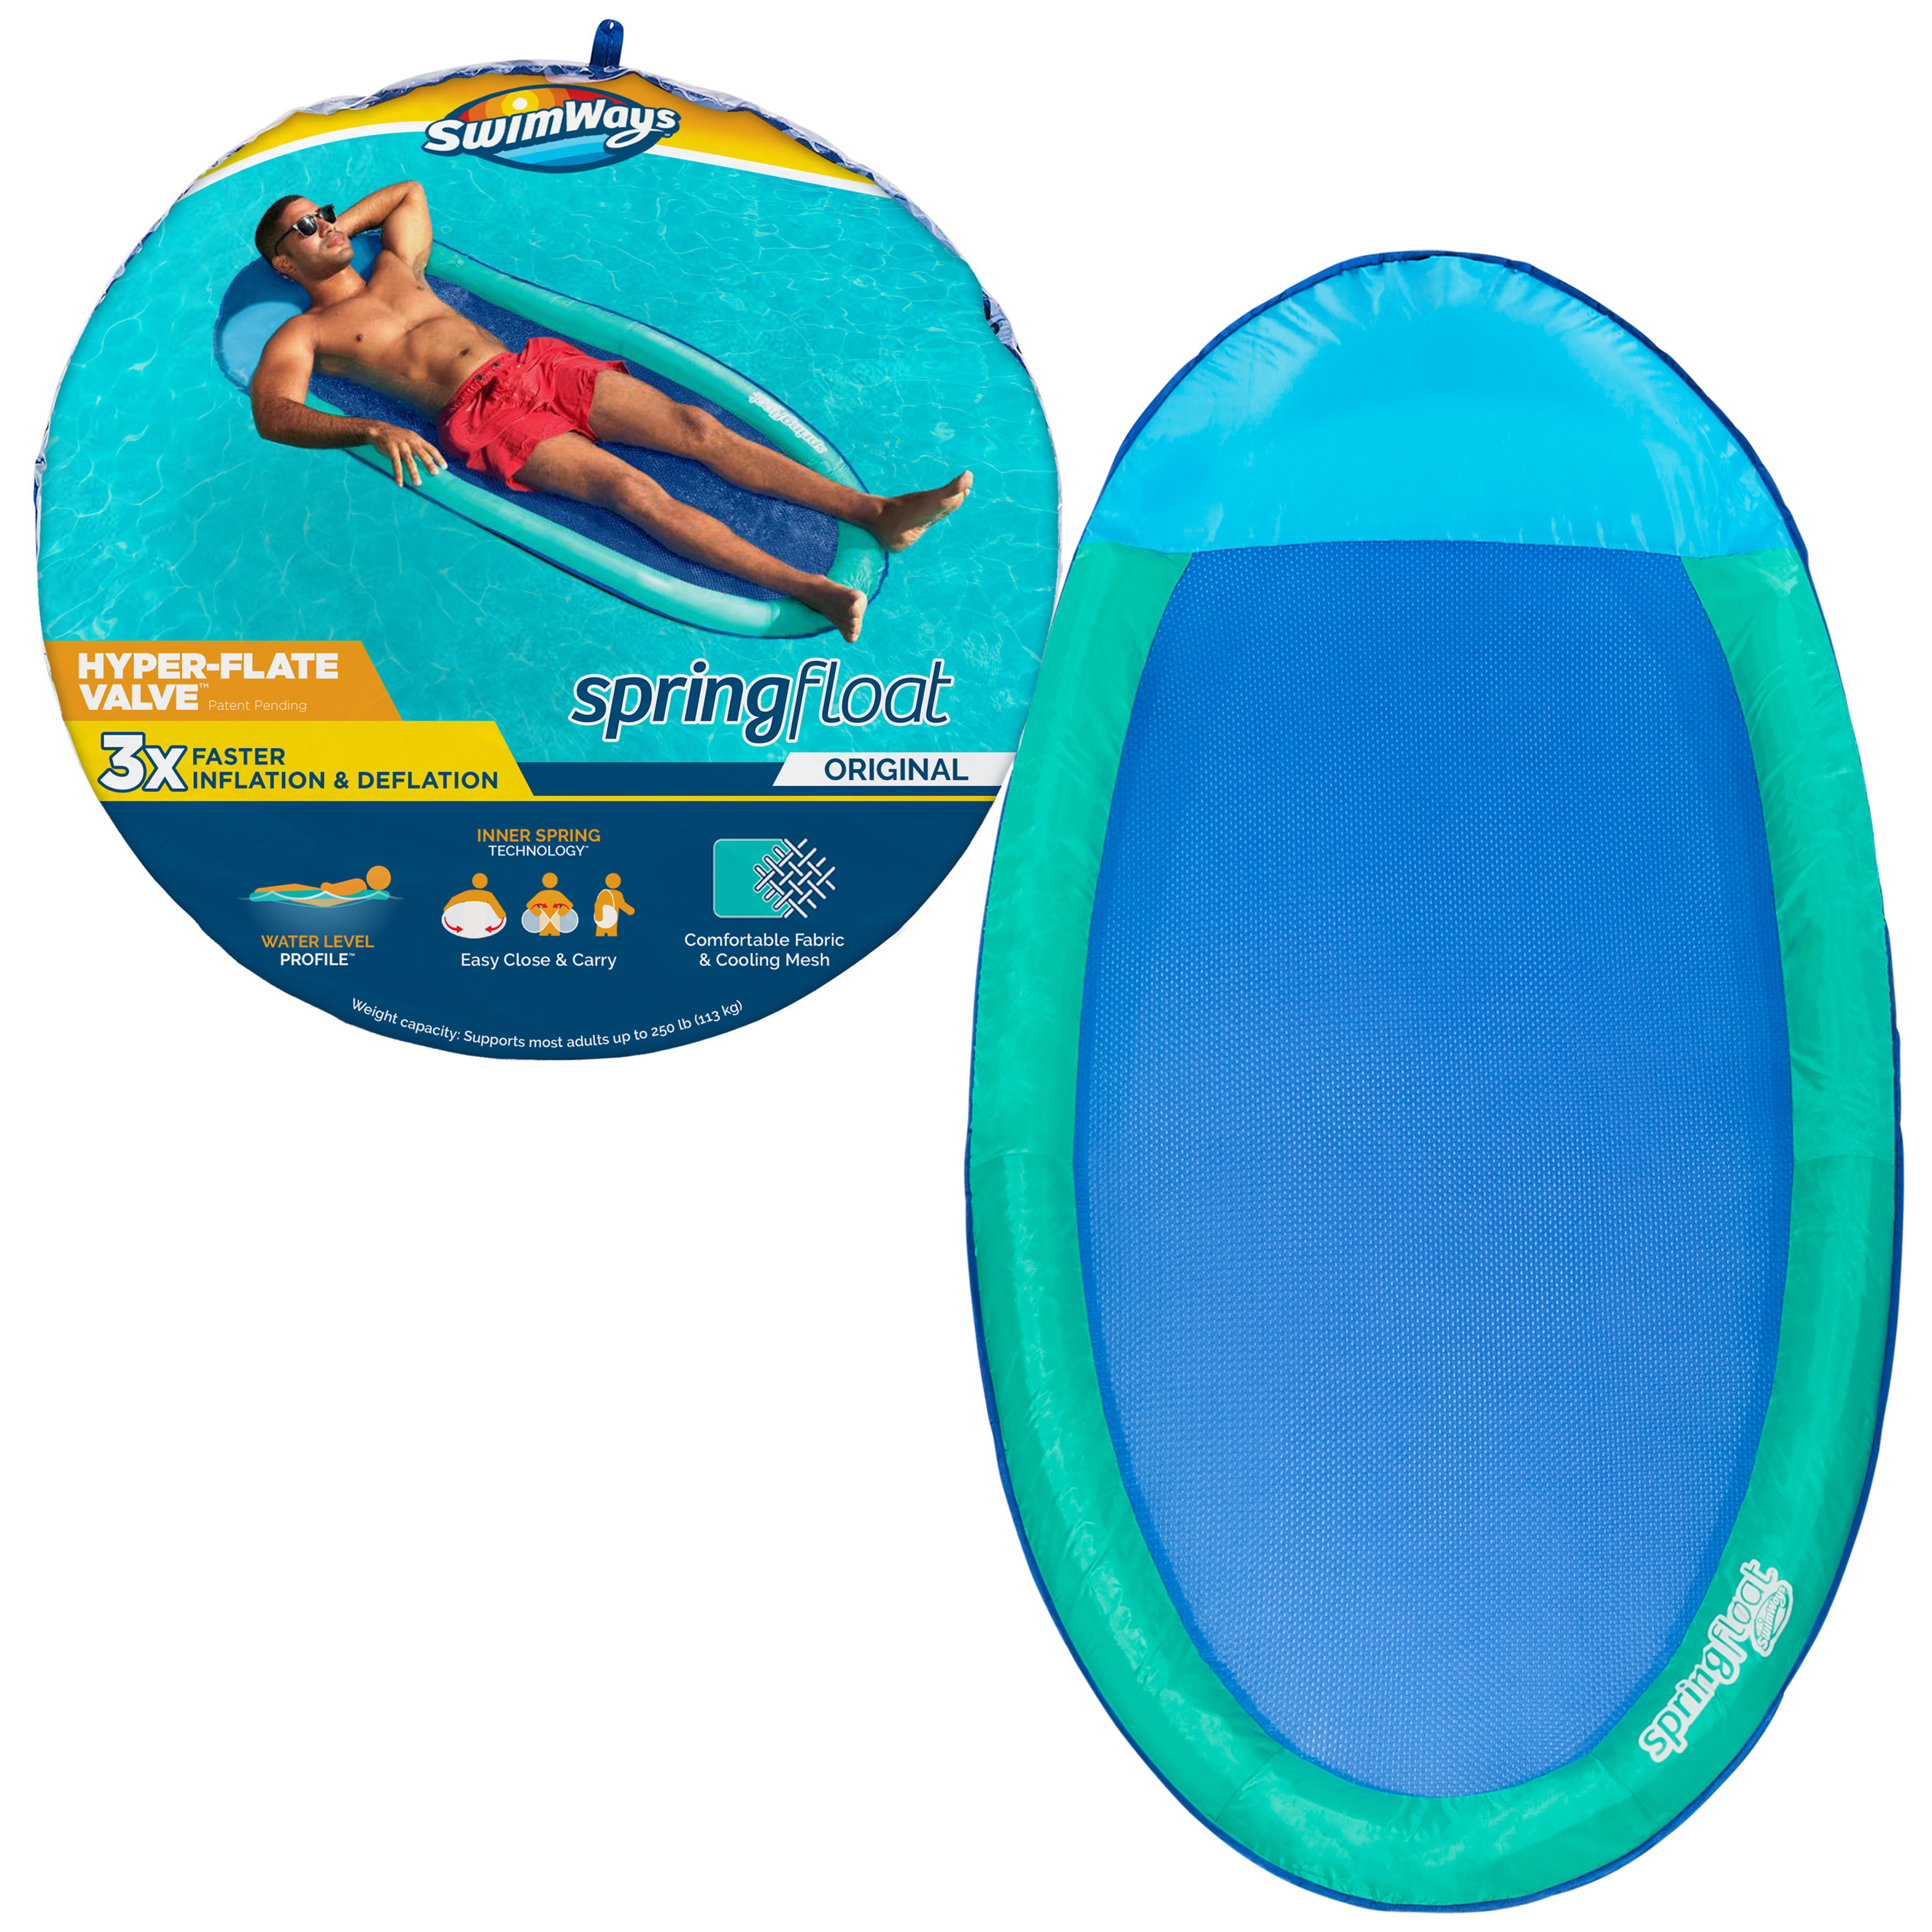 SwimWays Spring Float Inflatable Pool Lounger with Hyper-Flate Valve, Aqua - image 1 of 8